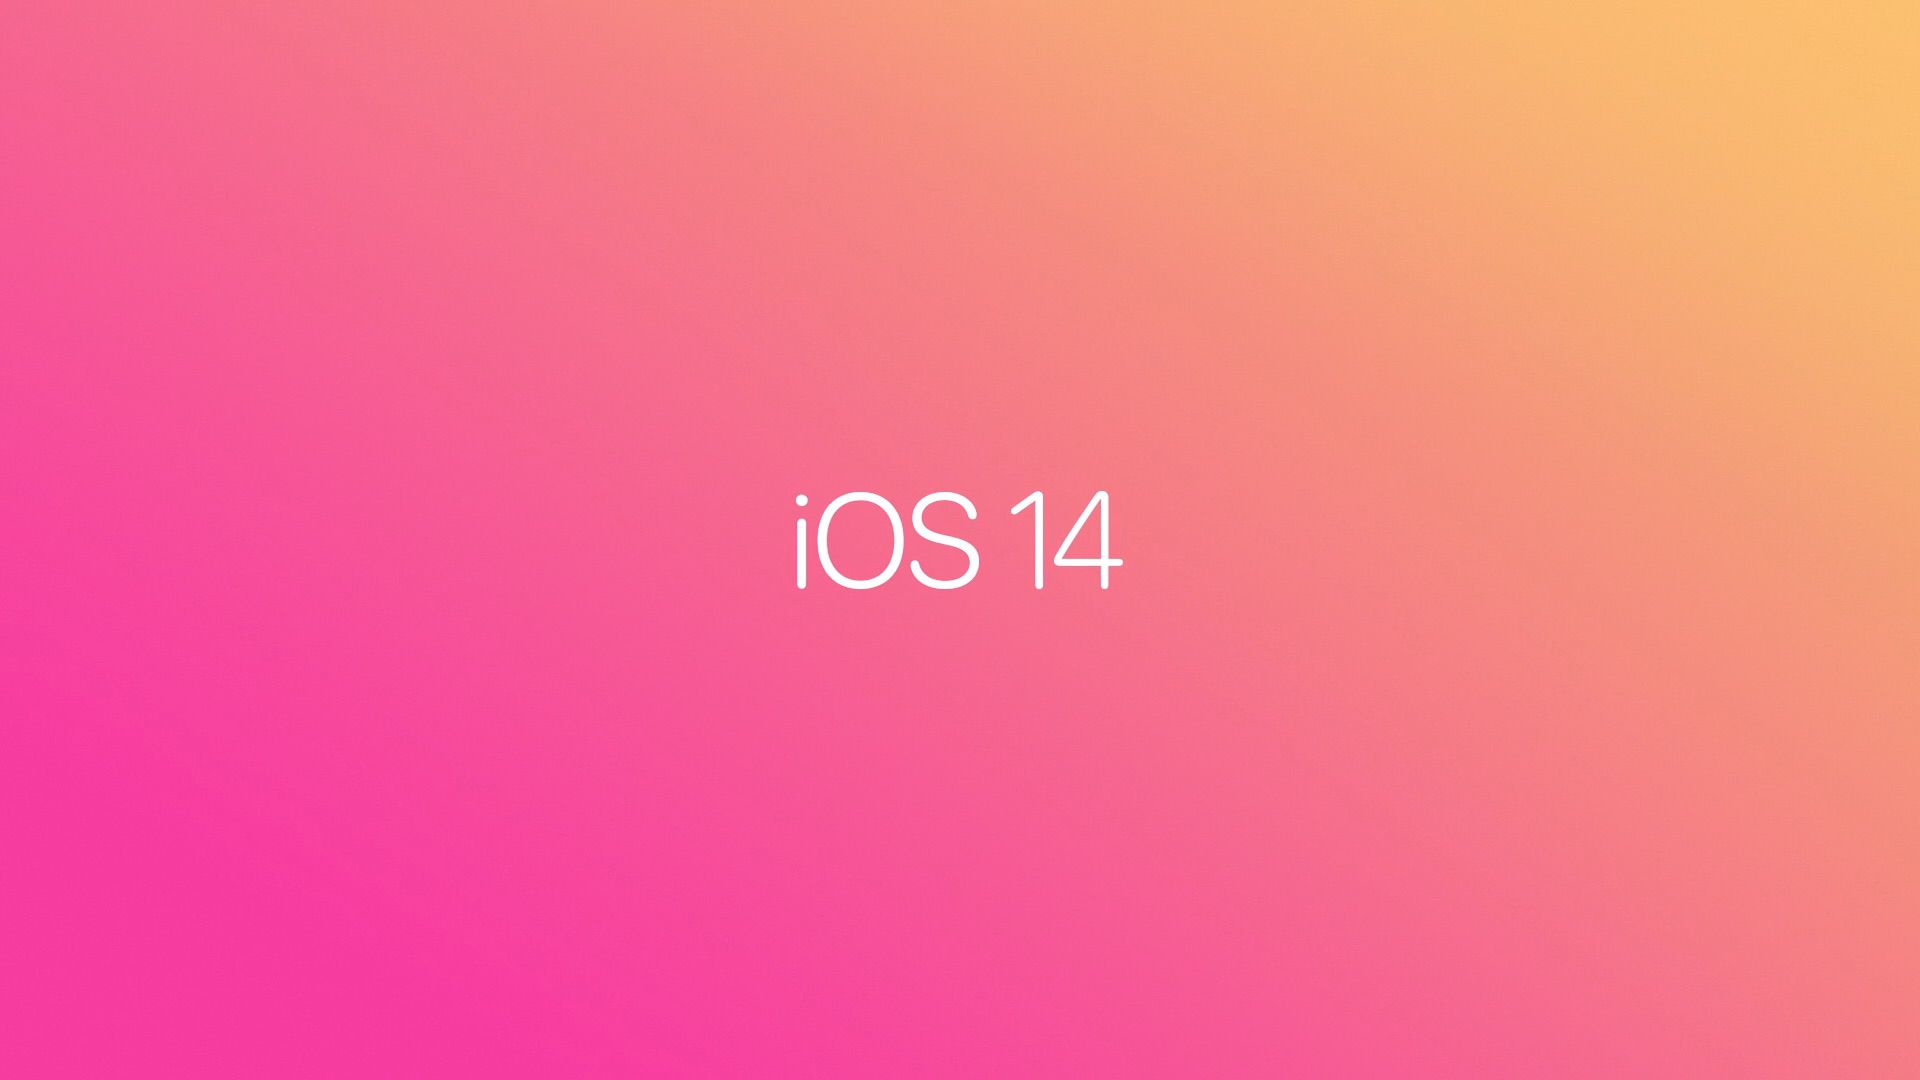 Download iOS 14 Wallpaper for iPhone